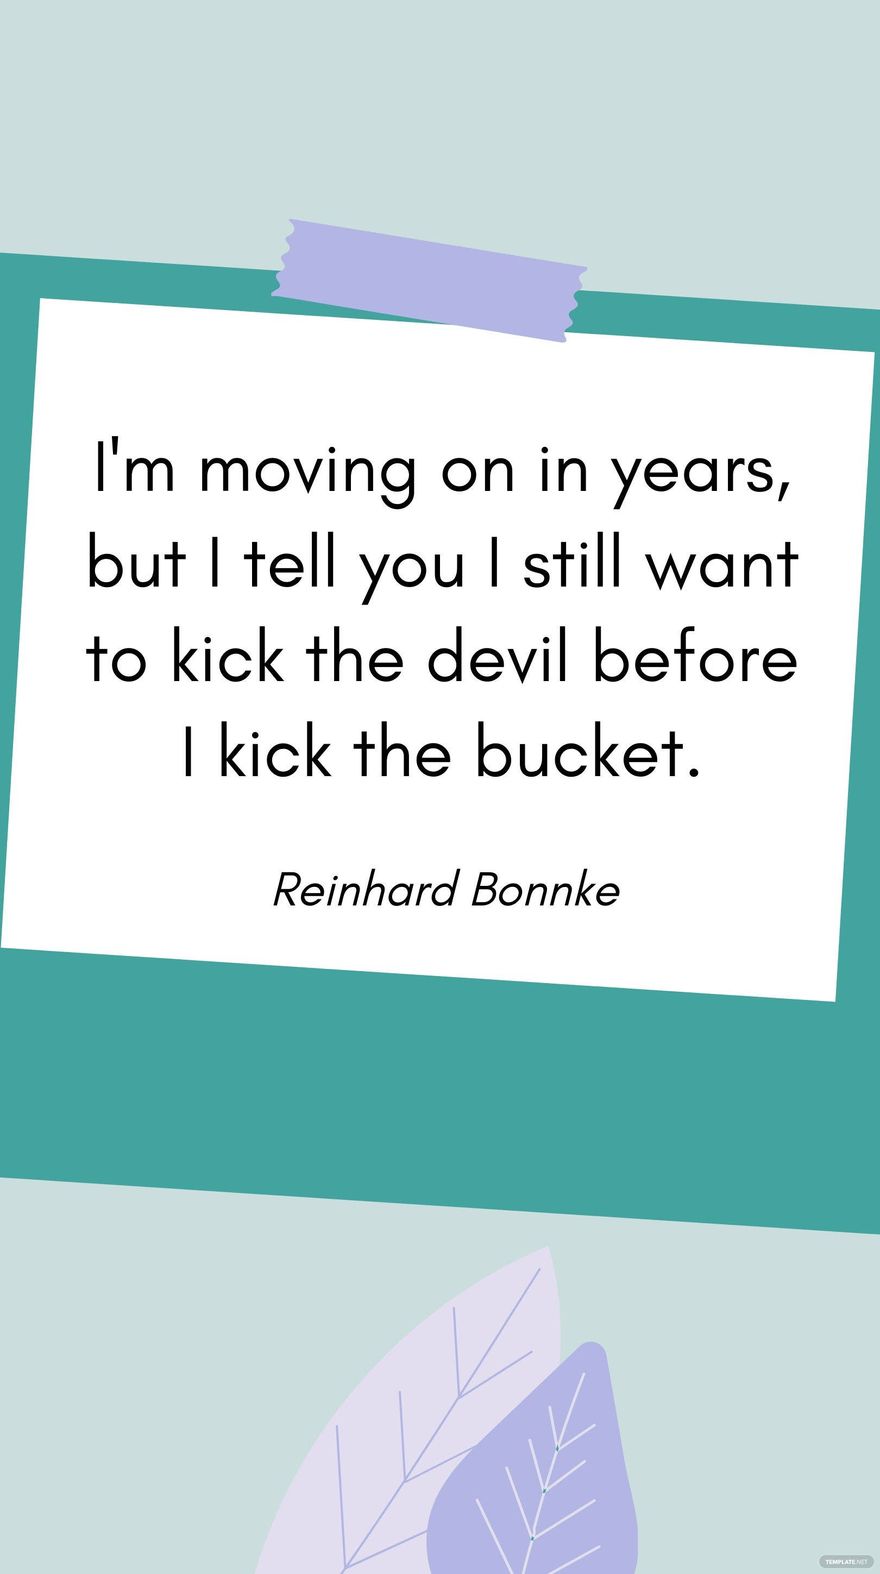 Free Reinhard Bonnke -I'm moving on in years, but I tell you I still want to kick the devil before I kick the bucket. in JPG